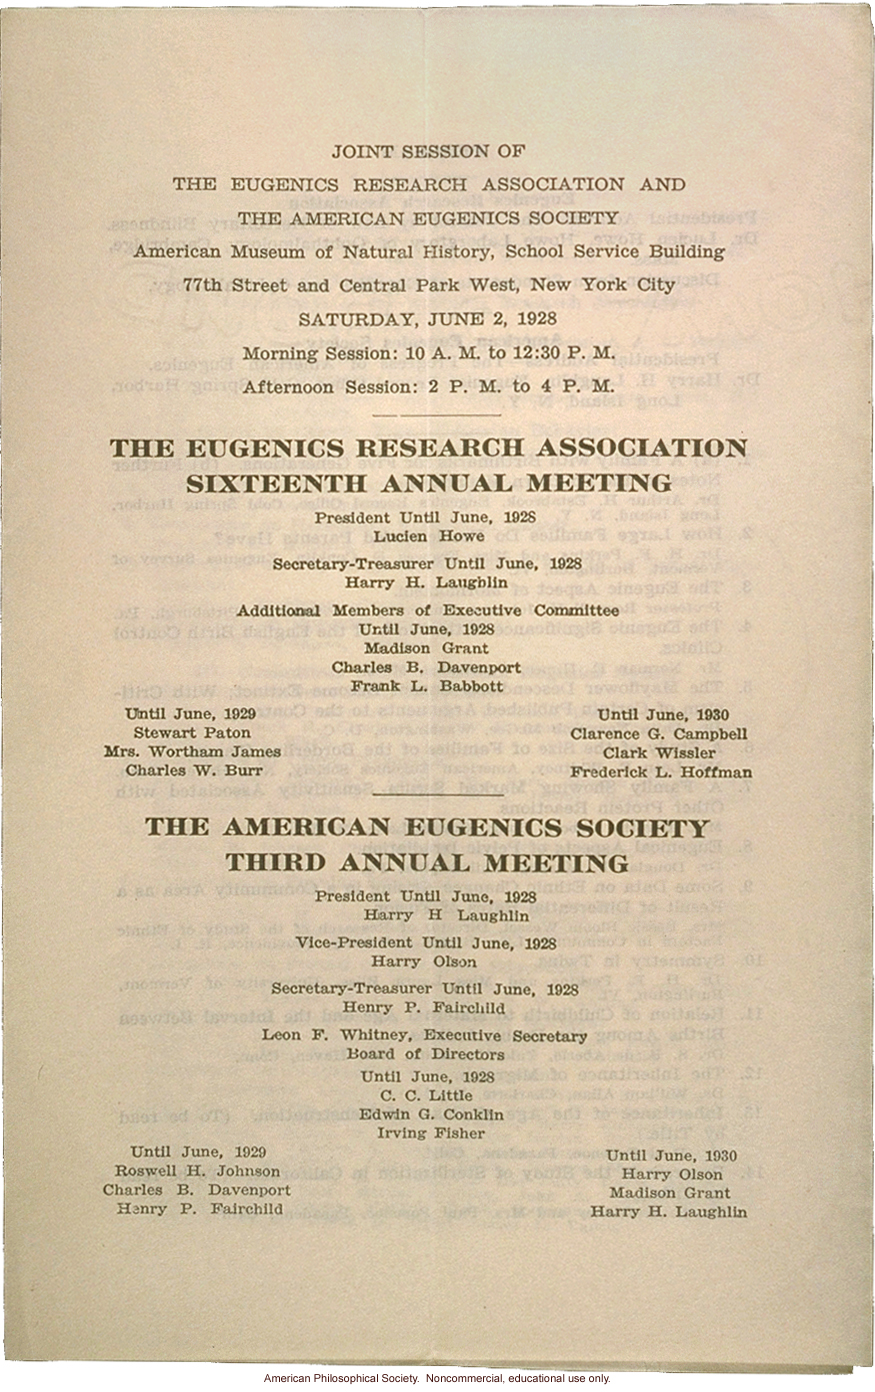 Eugenics Research Association 16th Annual Meeting